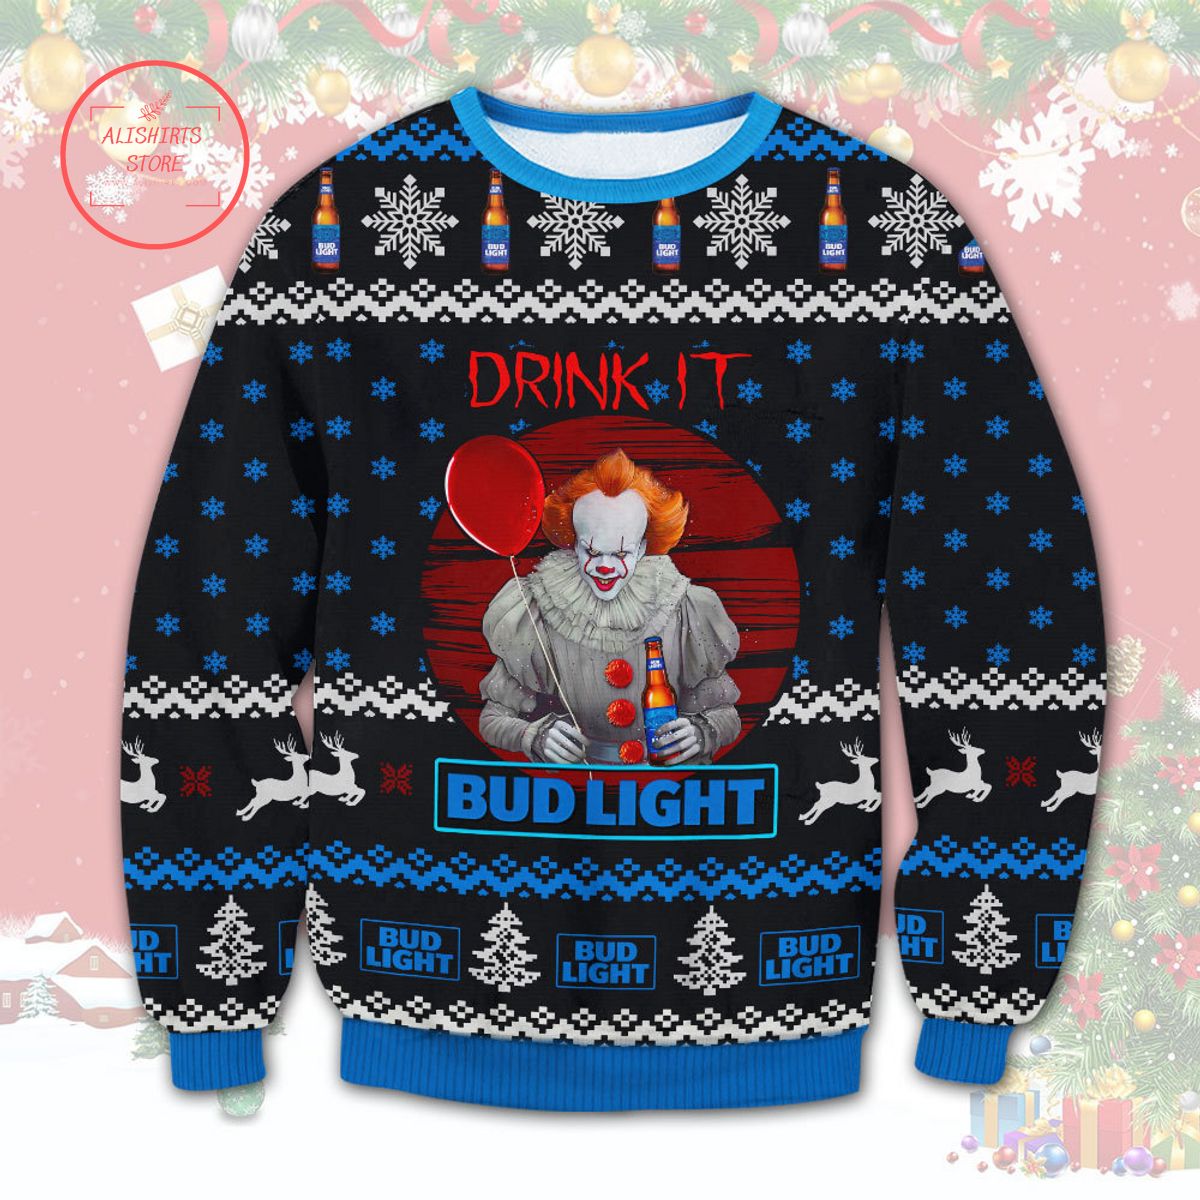 Bud Light Drink It Ugly Christmas Sweater